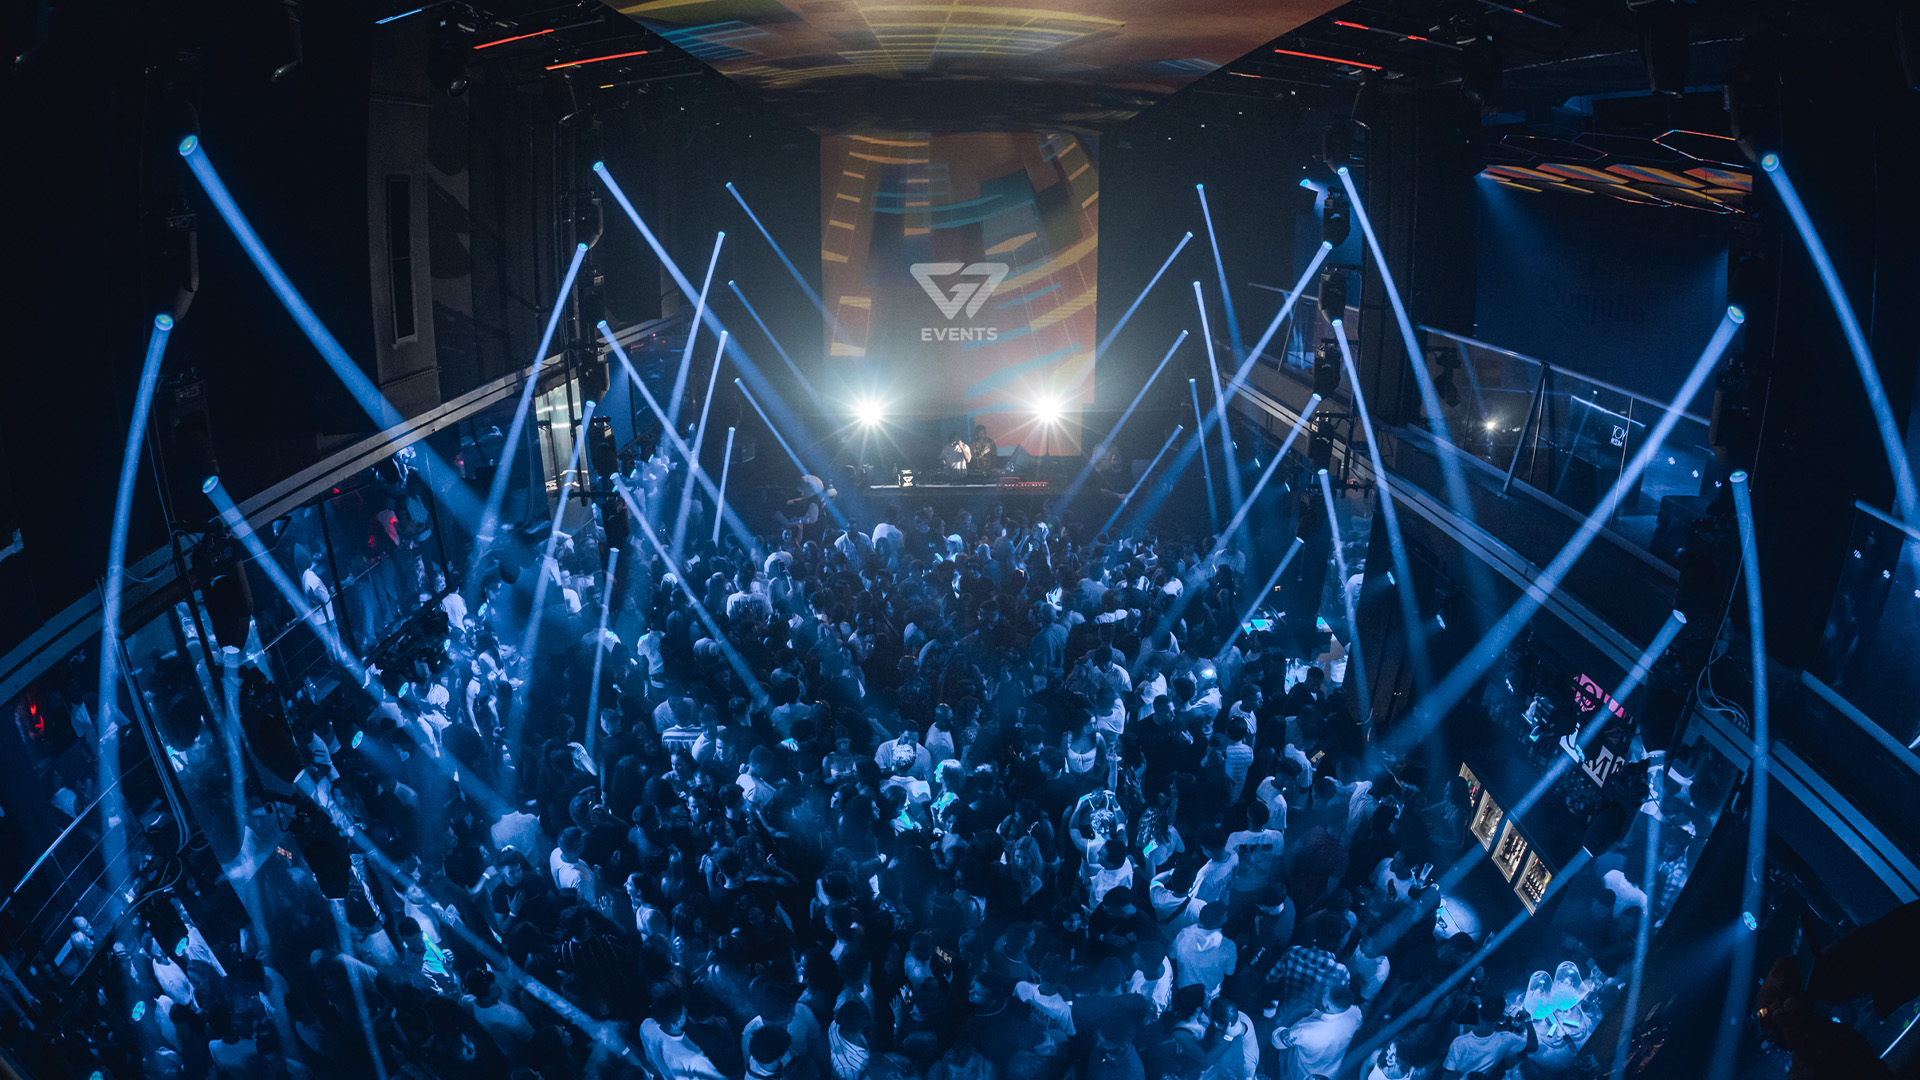 G7 Events Takes Center Stage at Toy Room Malta: A Night of Electrifying Beats and Local Talent